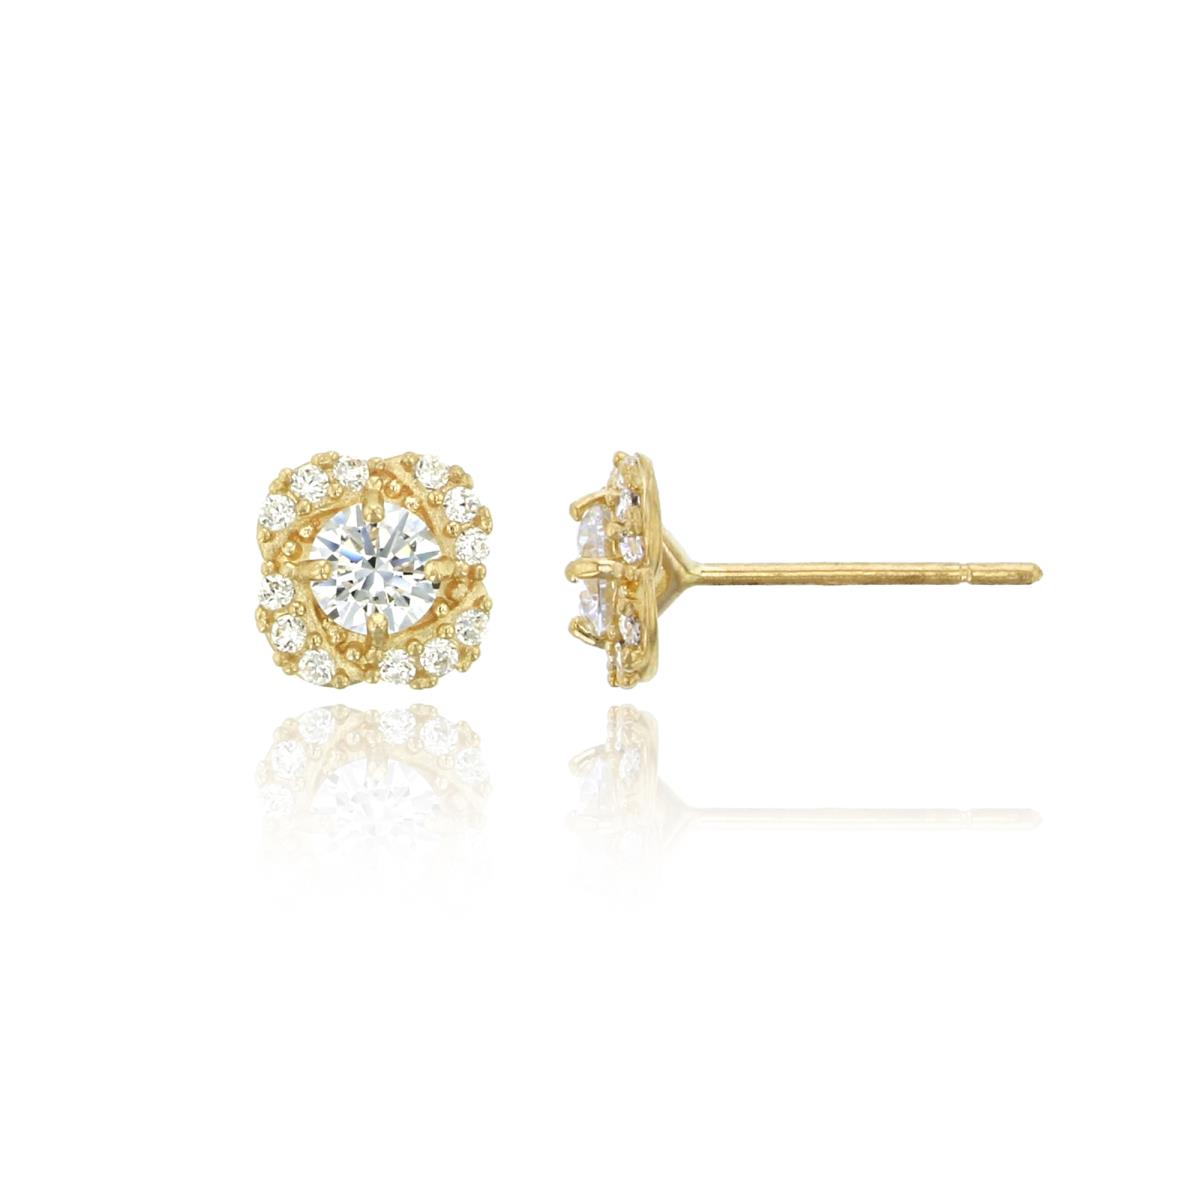 14K Yellow Gold Micropave 3.5mm Round Cut Clover CZ Stud Earring